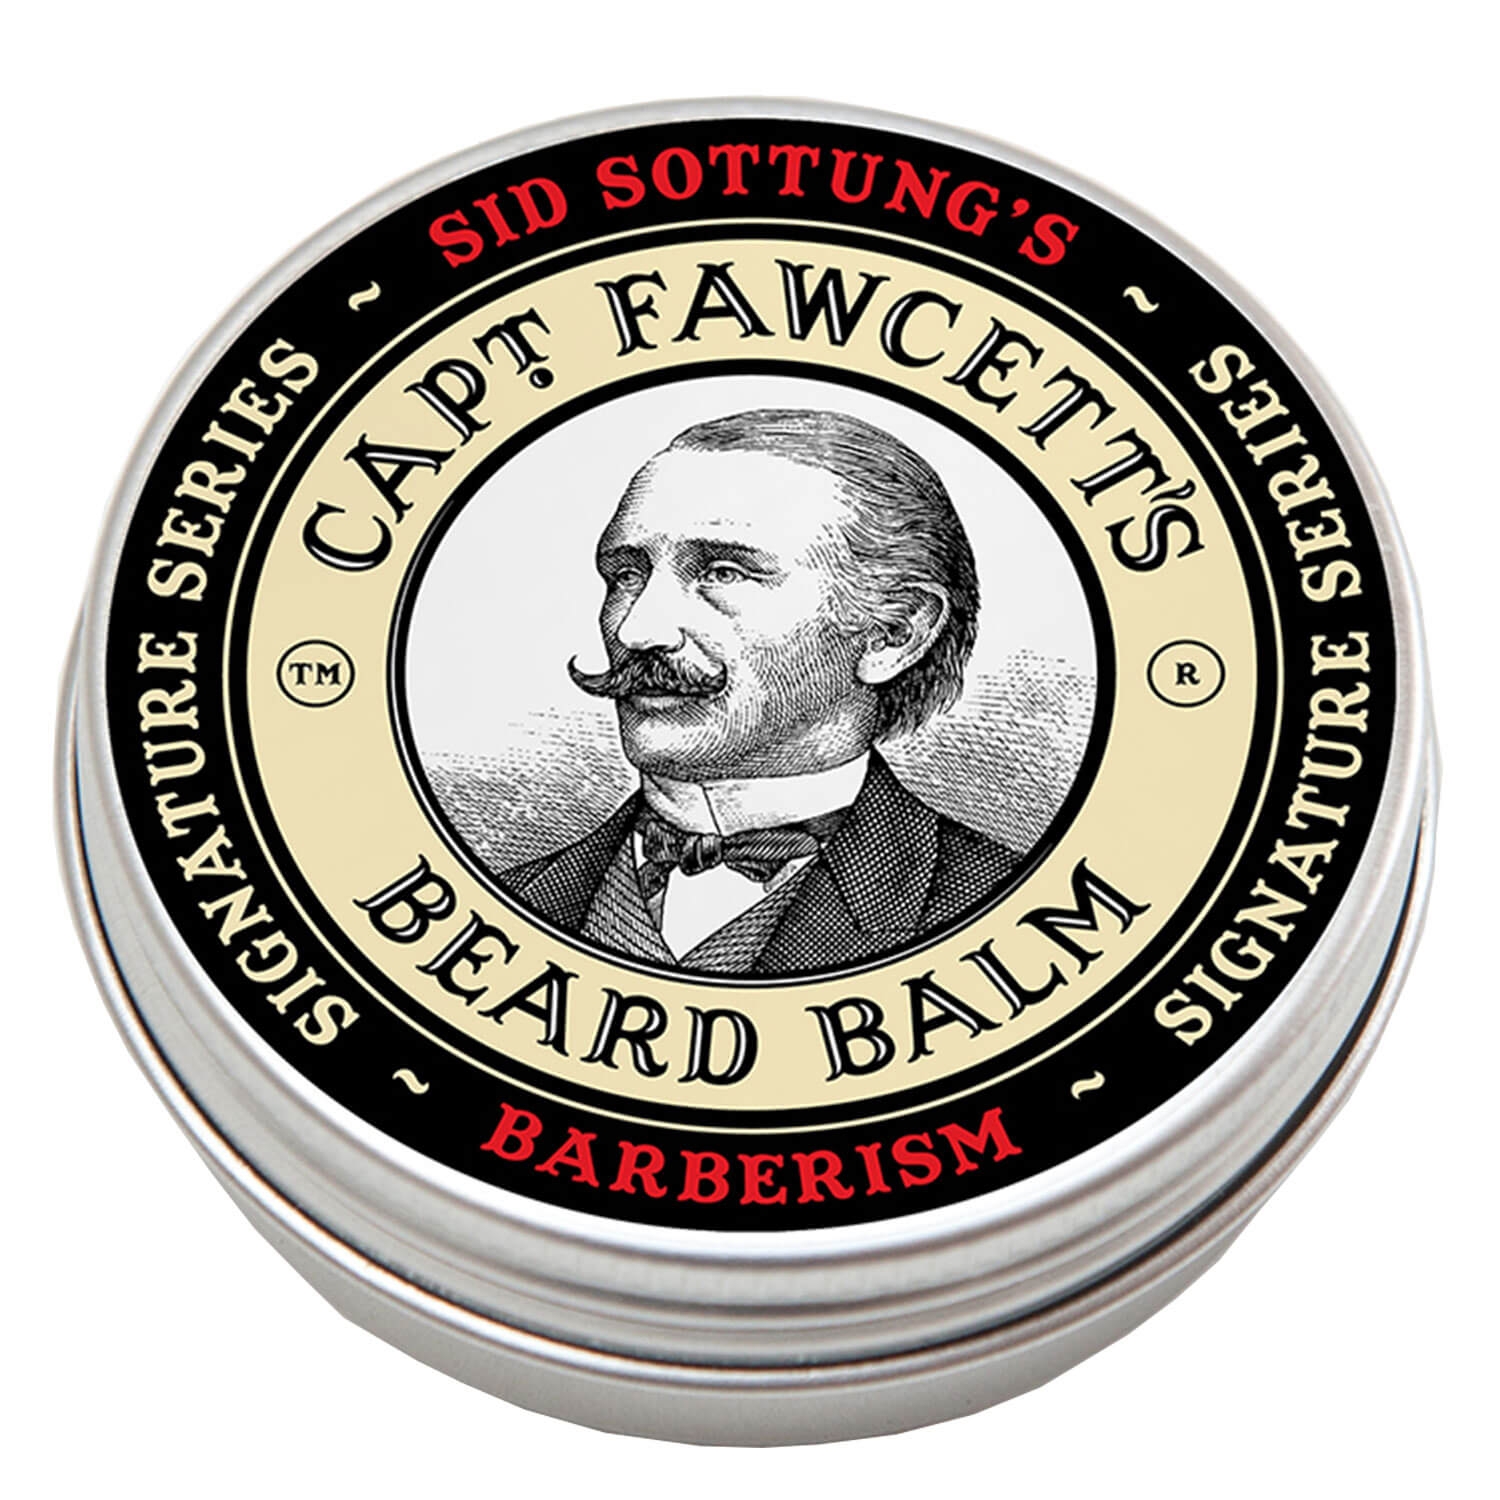 Product image from Capt. Fawcett Care - Sid Sottung's Barberism Beard Balm